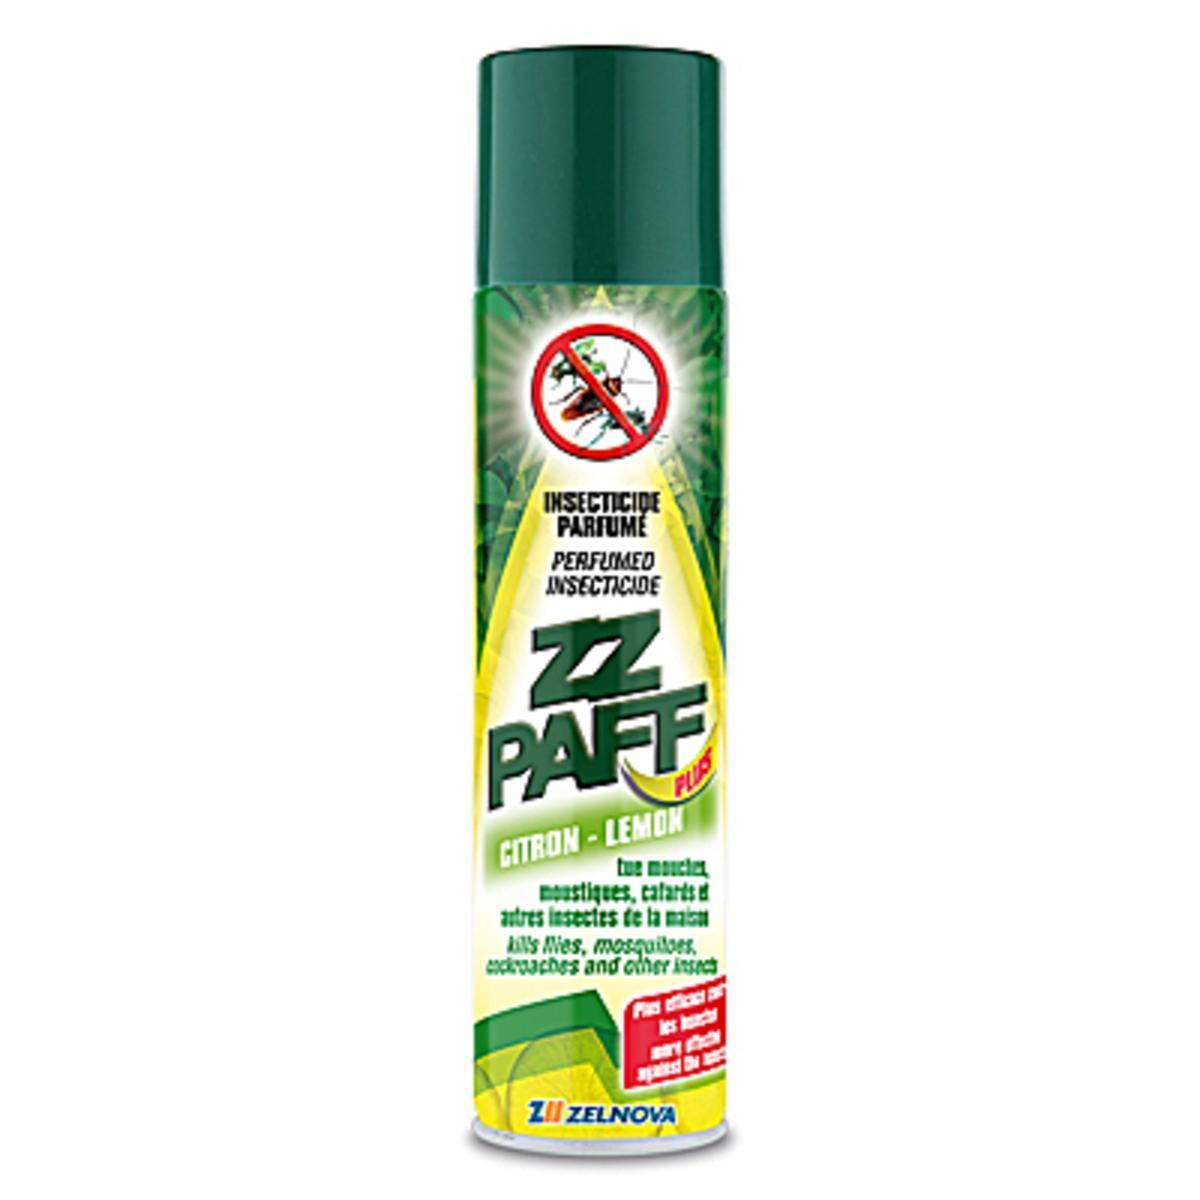 Insecticide contre rampants - 750 ml